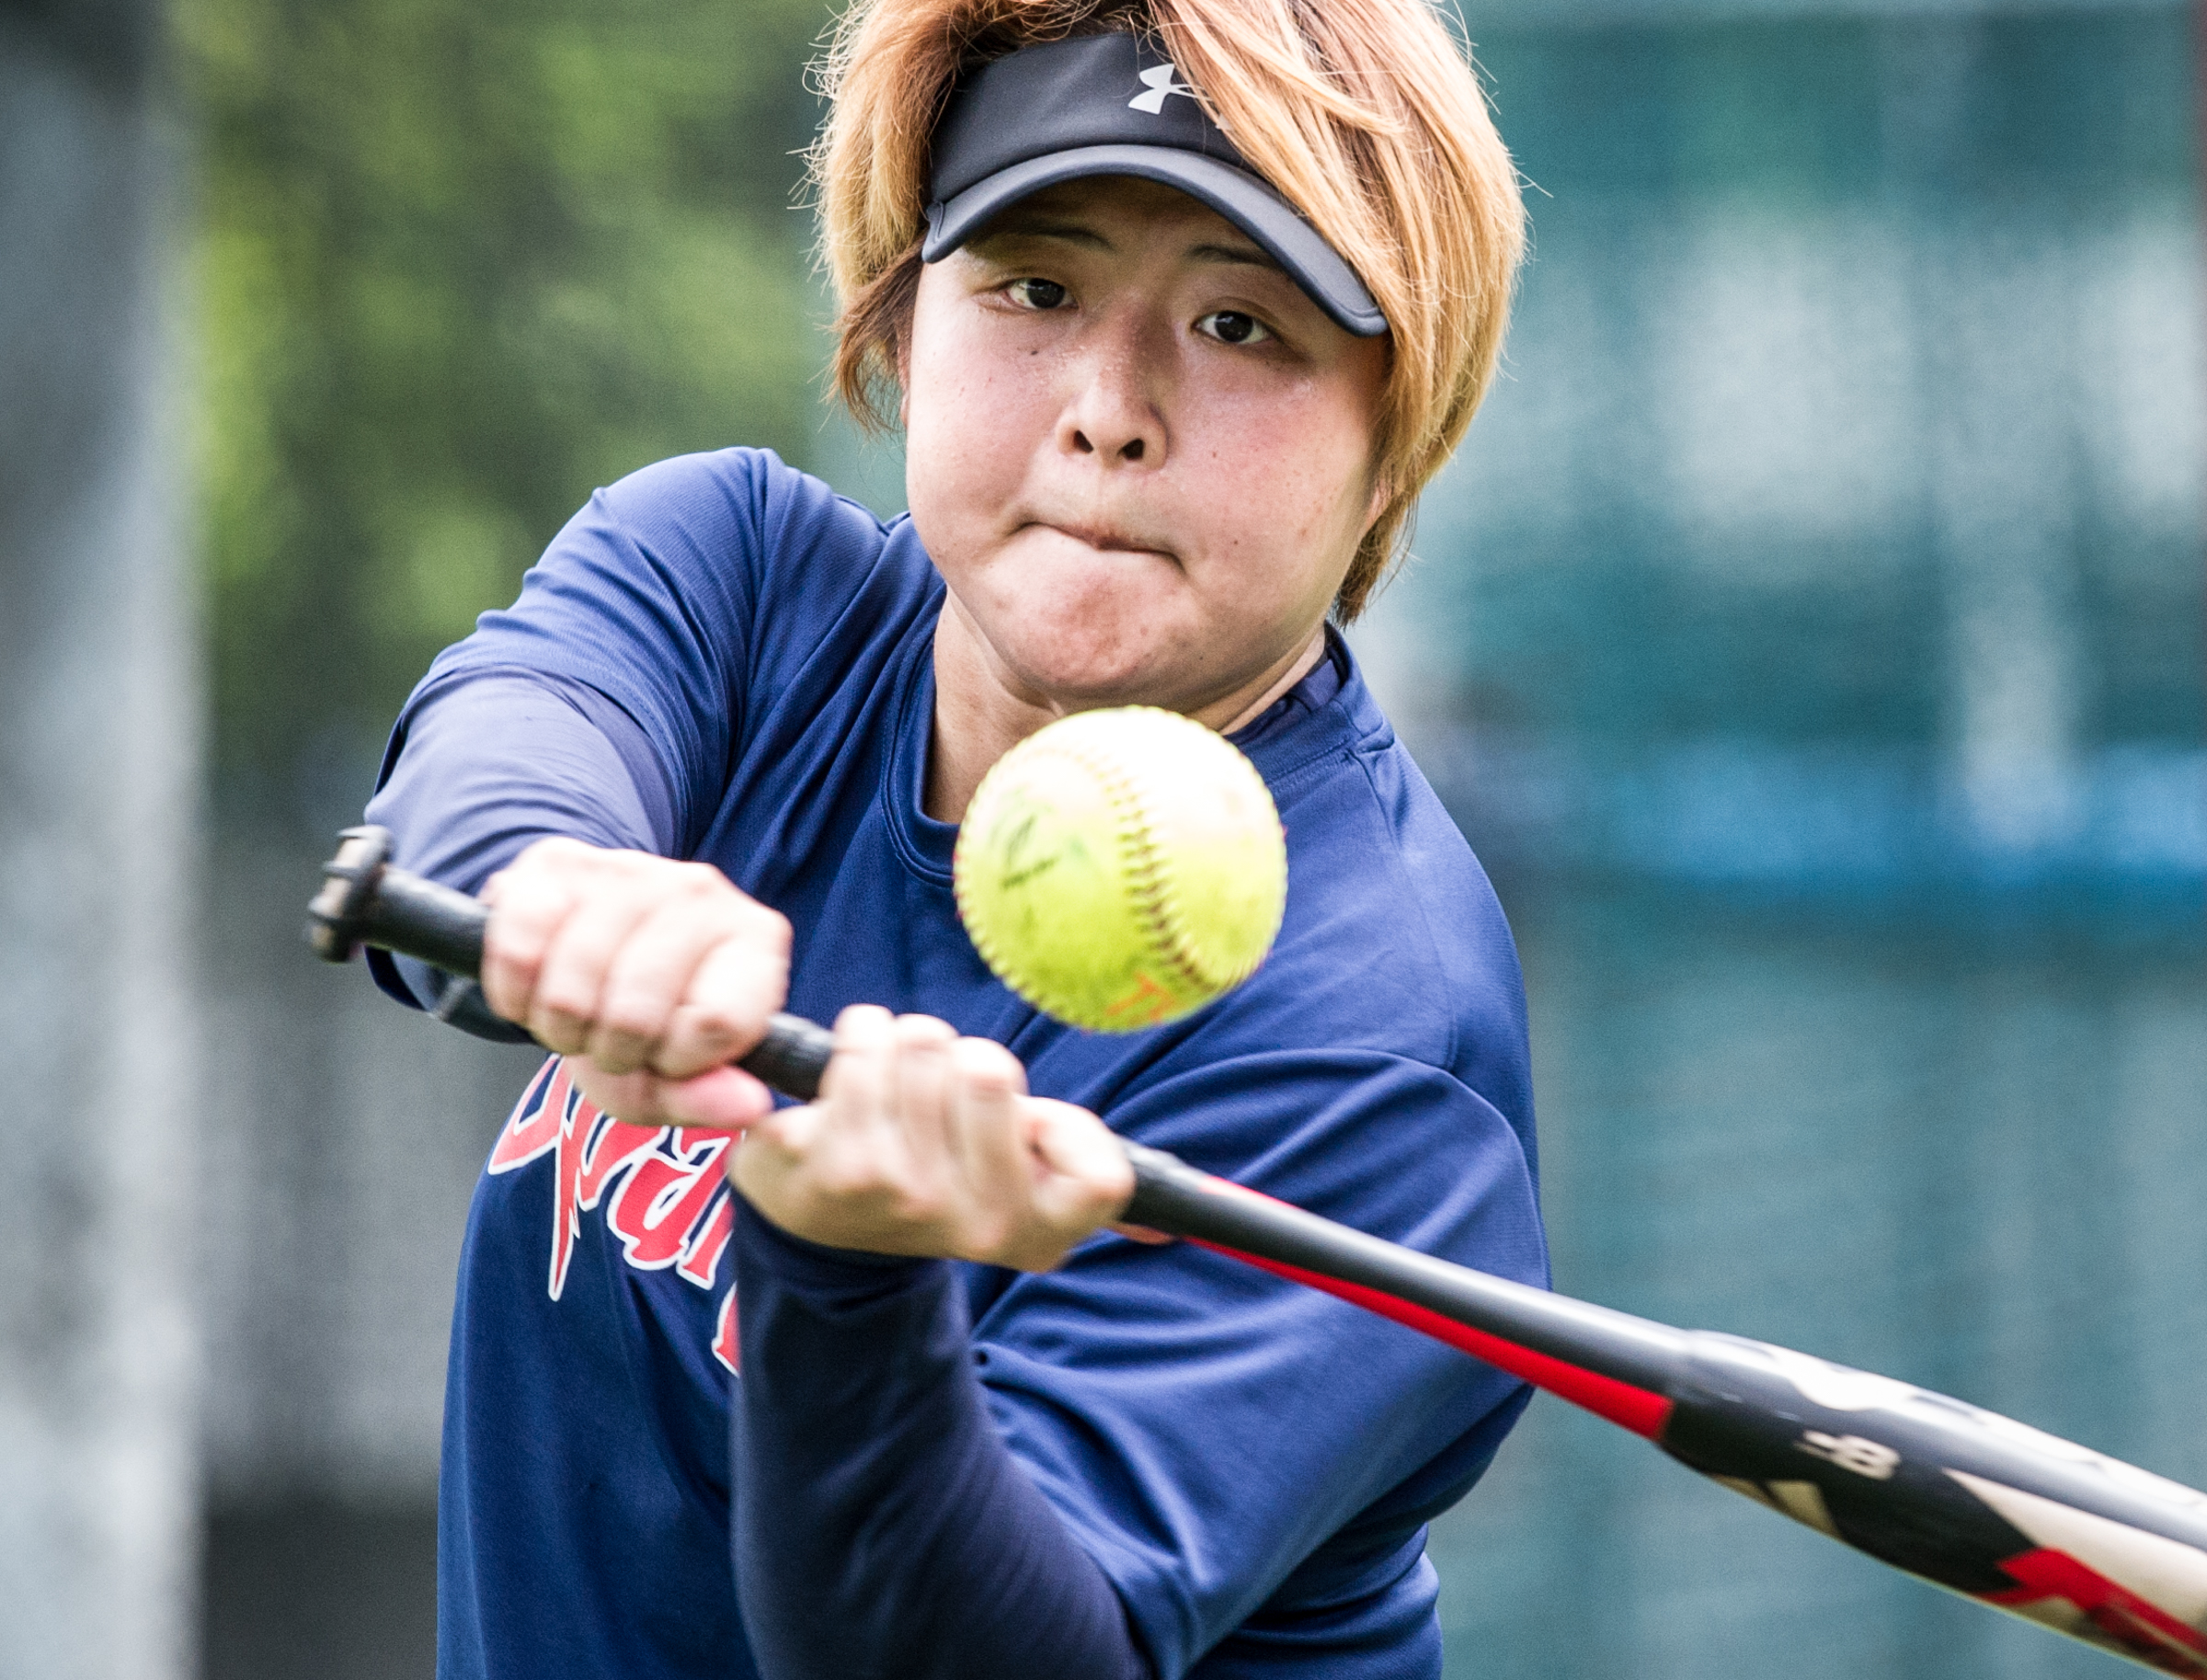 A Singaporean player prepares to hit the ball during the ORA Gryphon Cup slow pitch tournament at Raffles Institution.